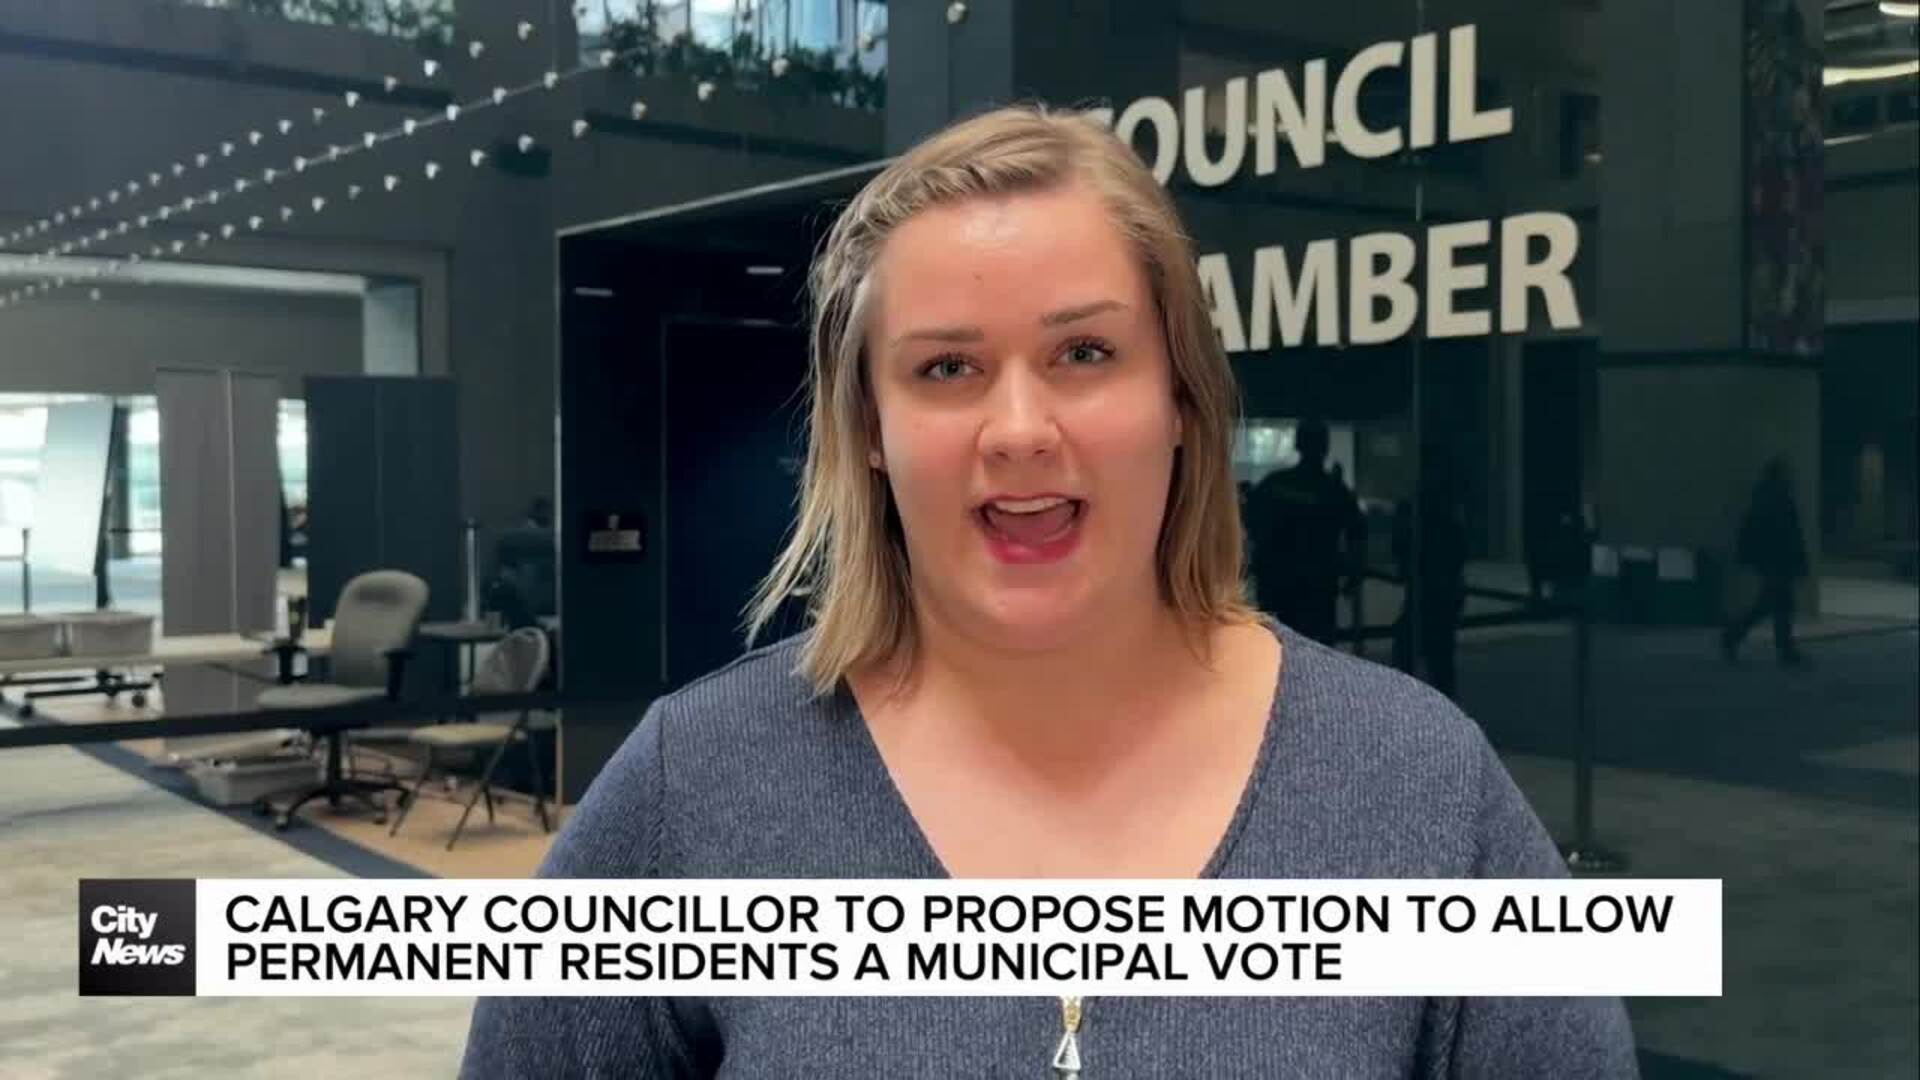 Should permanent residents be able to vote?